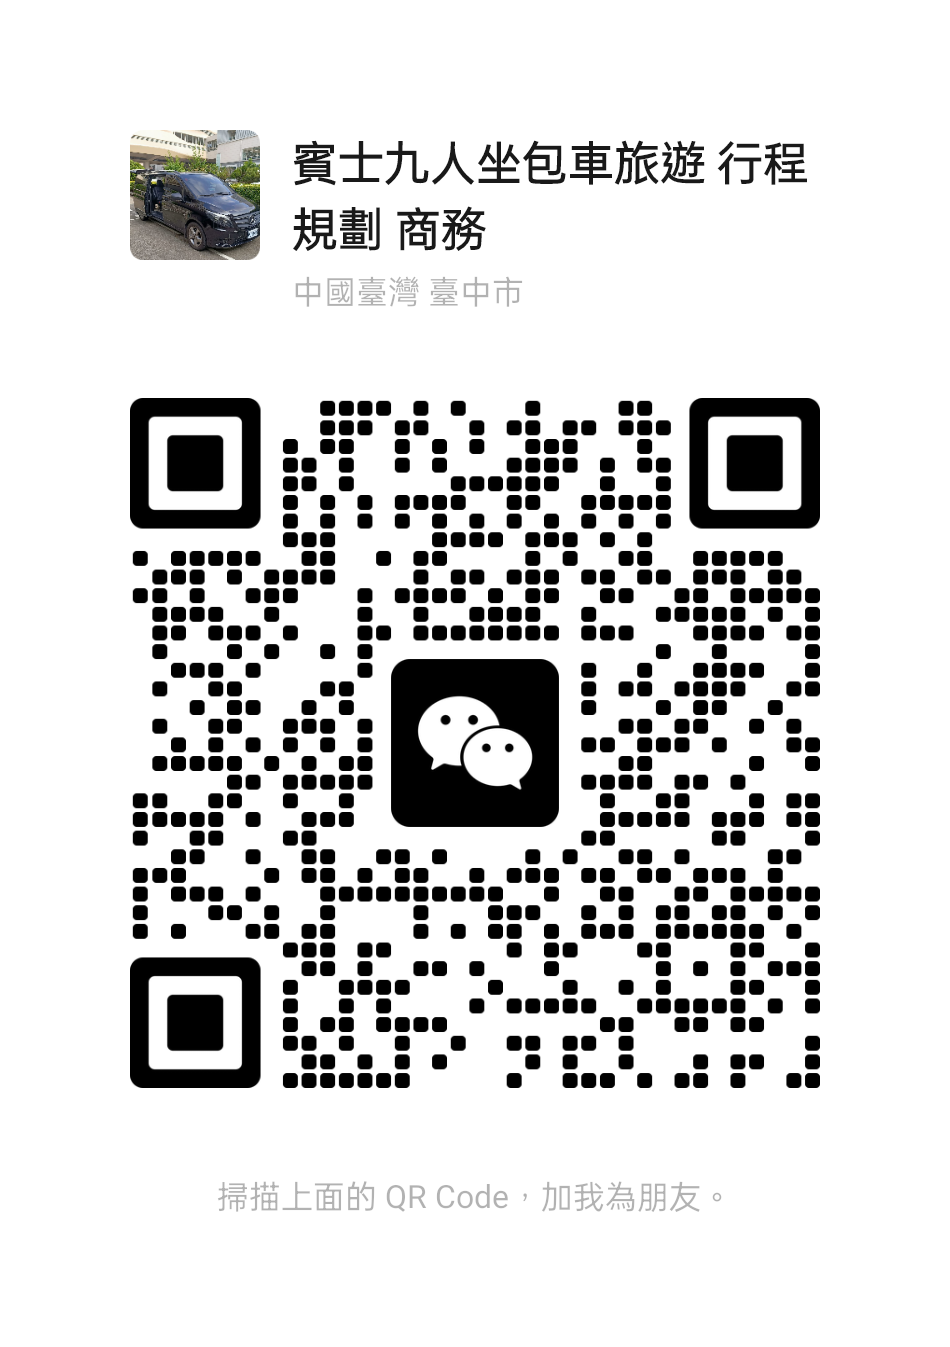 mmqrcode1684941807869.png